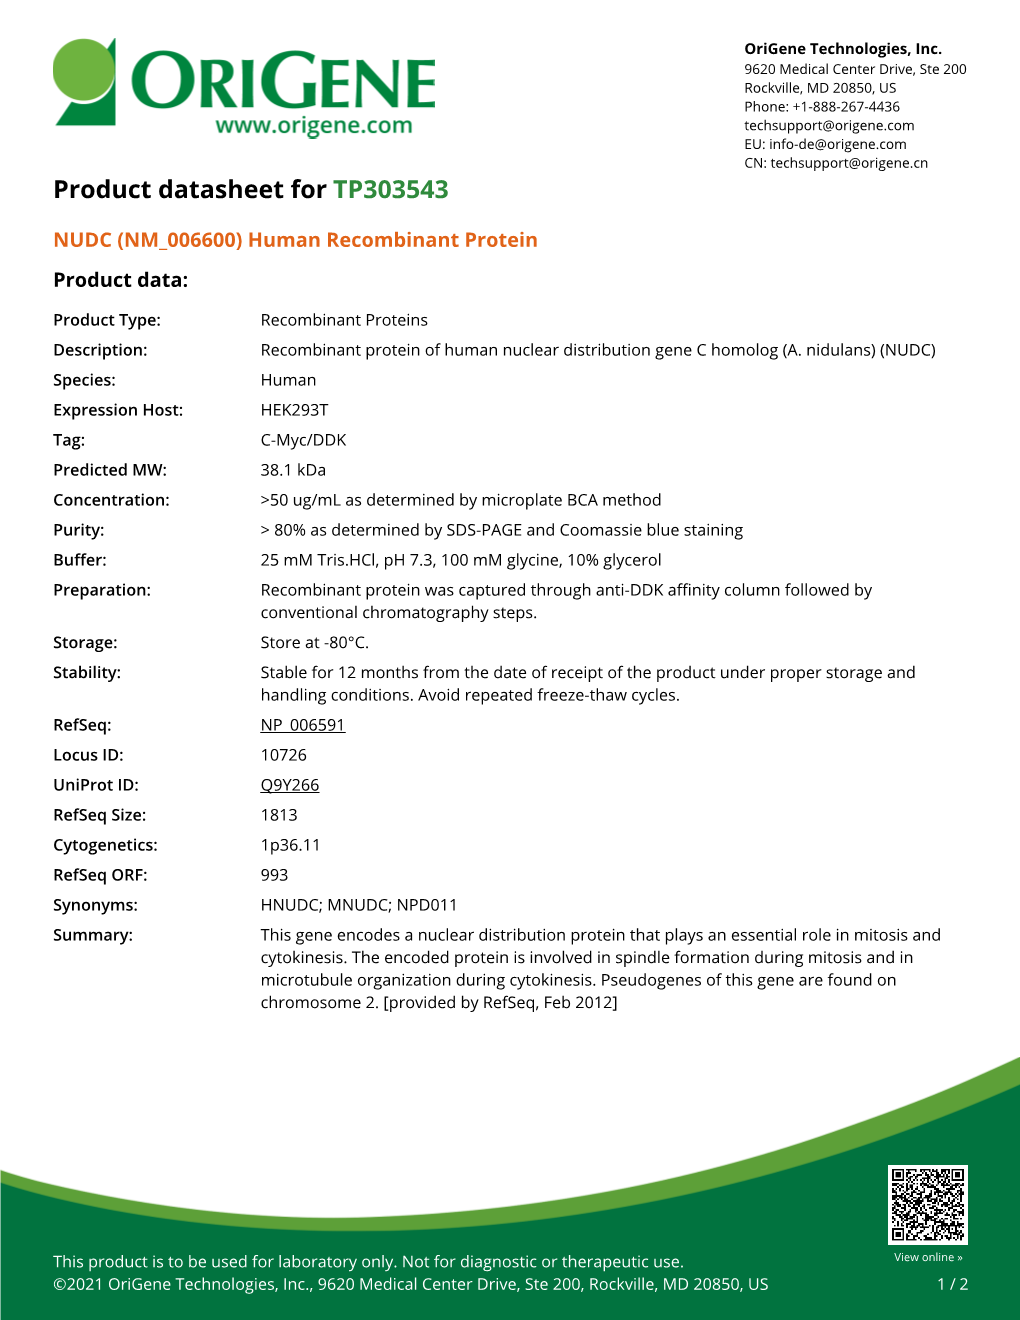 NUDC (NM 006600) Human Recombinant Protein Product Data